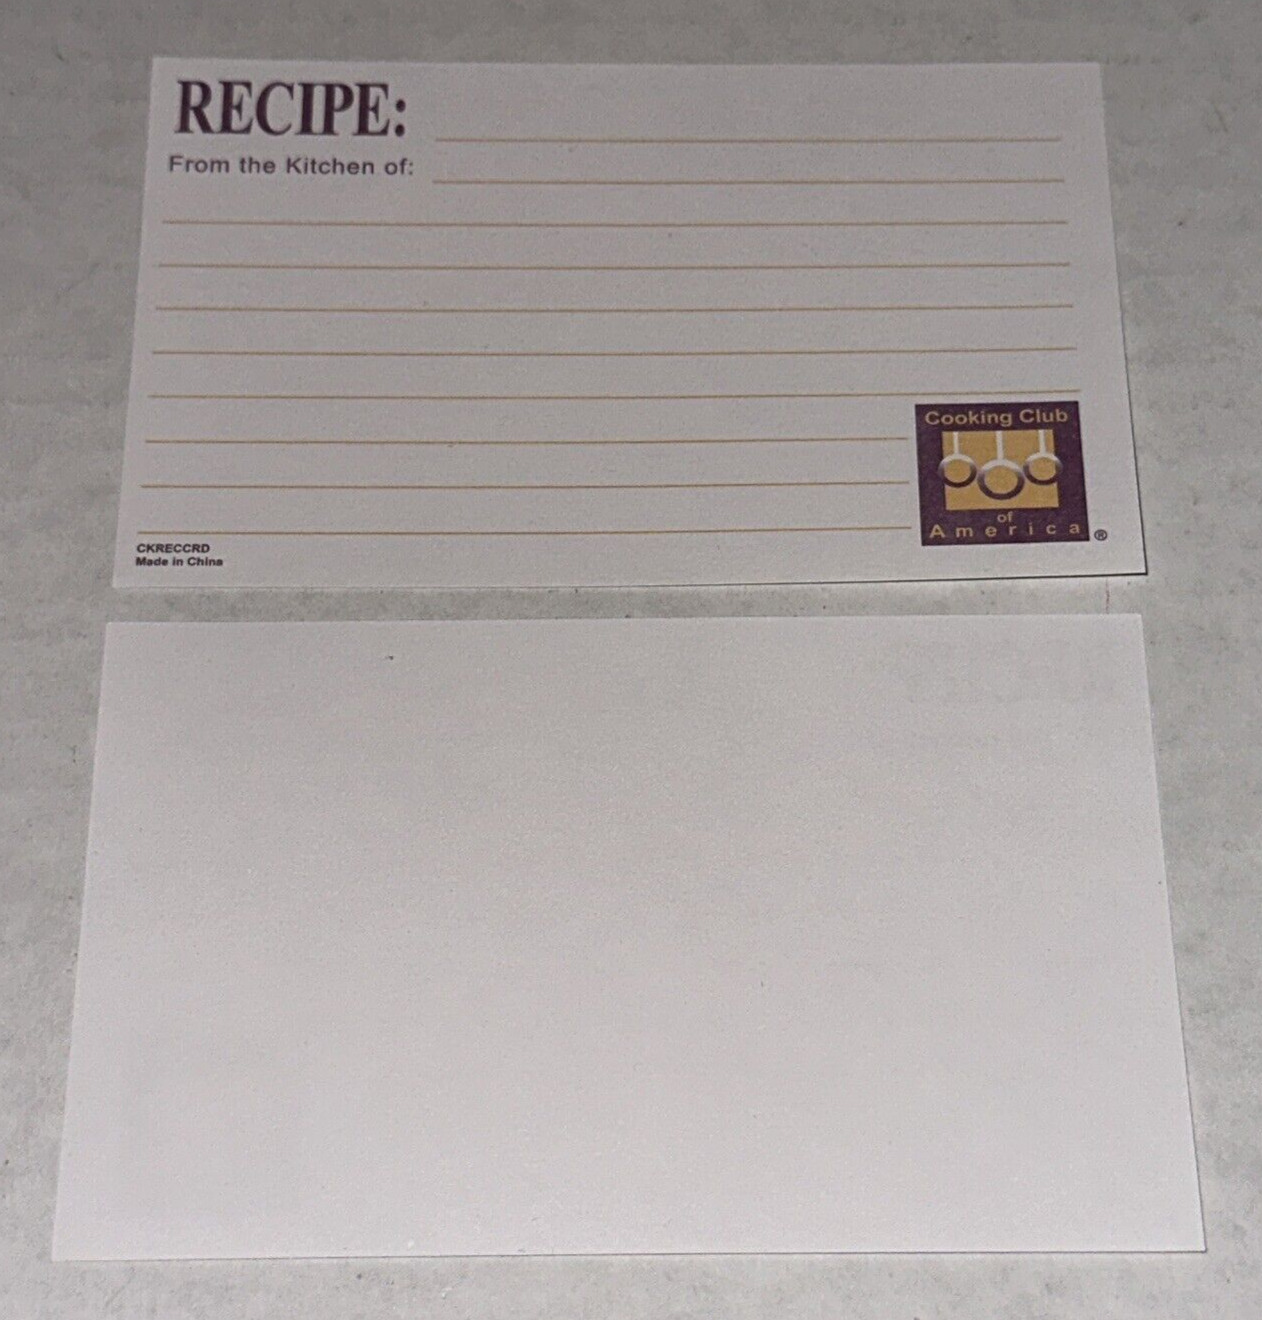 x30 NOS Vintage Cooking Club of American Recipe Cards \'3 x 5\' Sealed Blank Backs